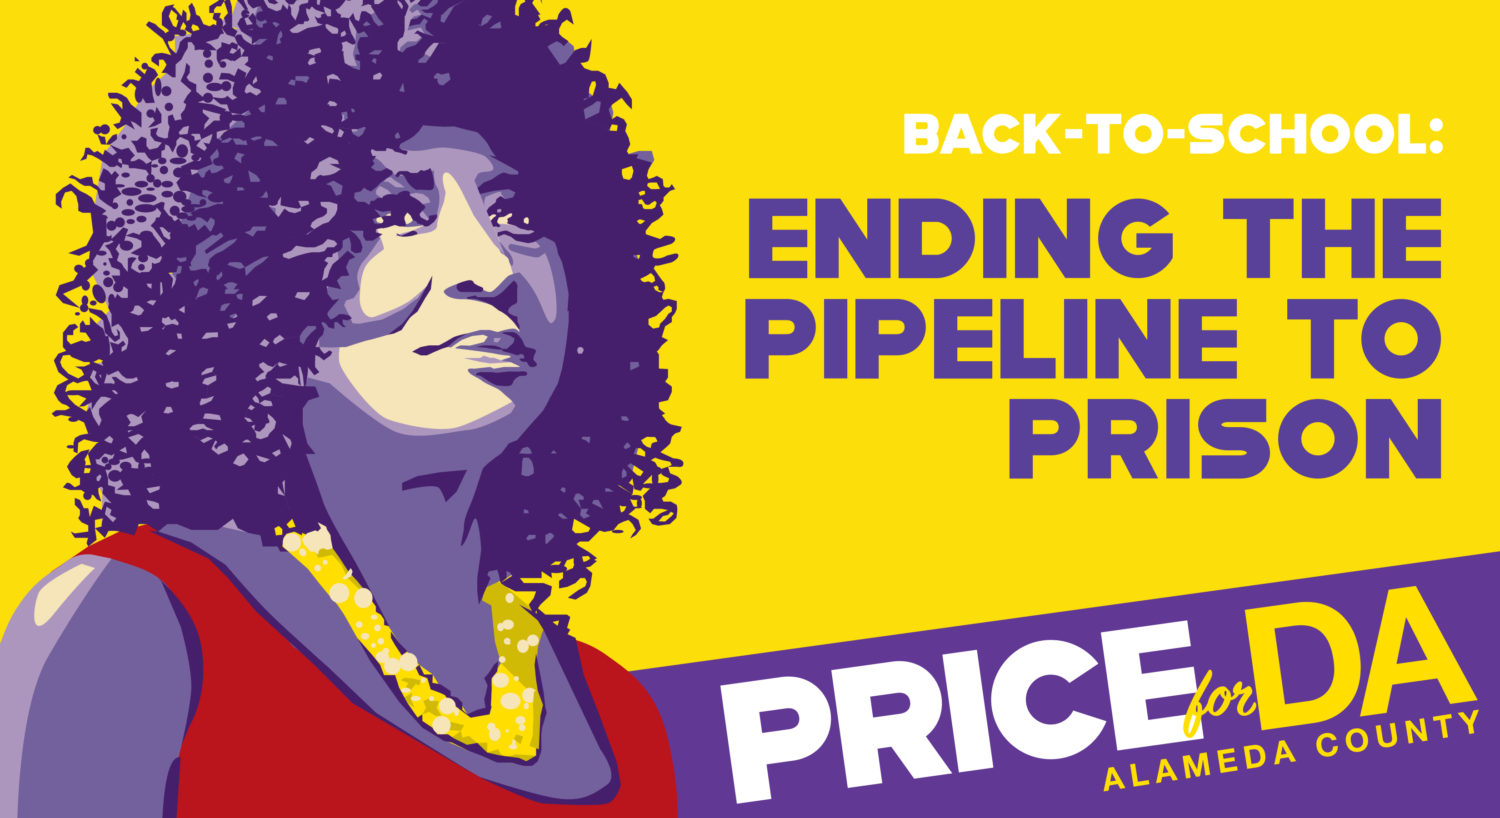 Pamela Price for Alameda County District Attorney - Back to School: Ending the Pipeline to Prison